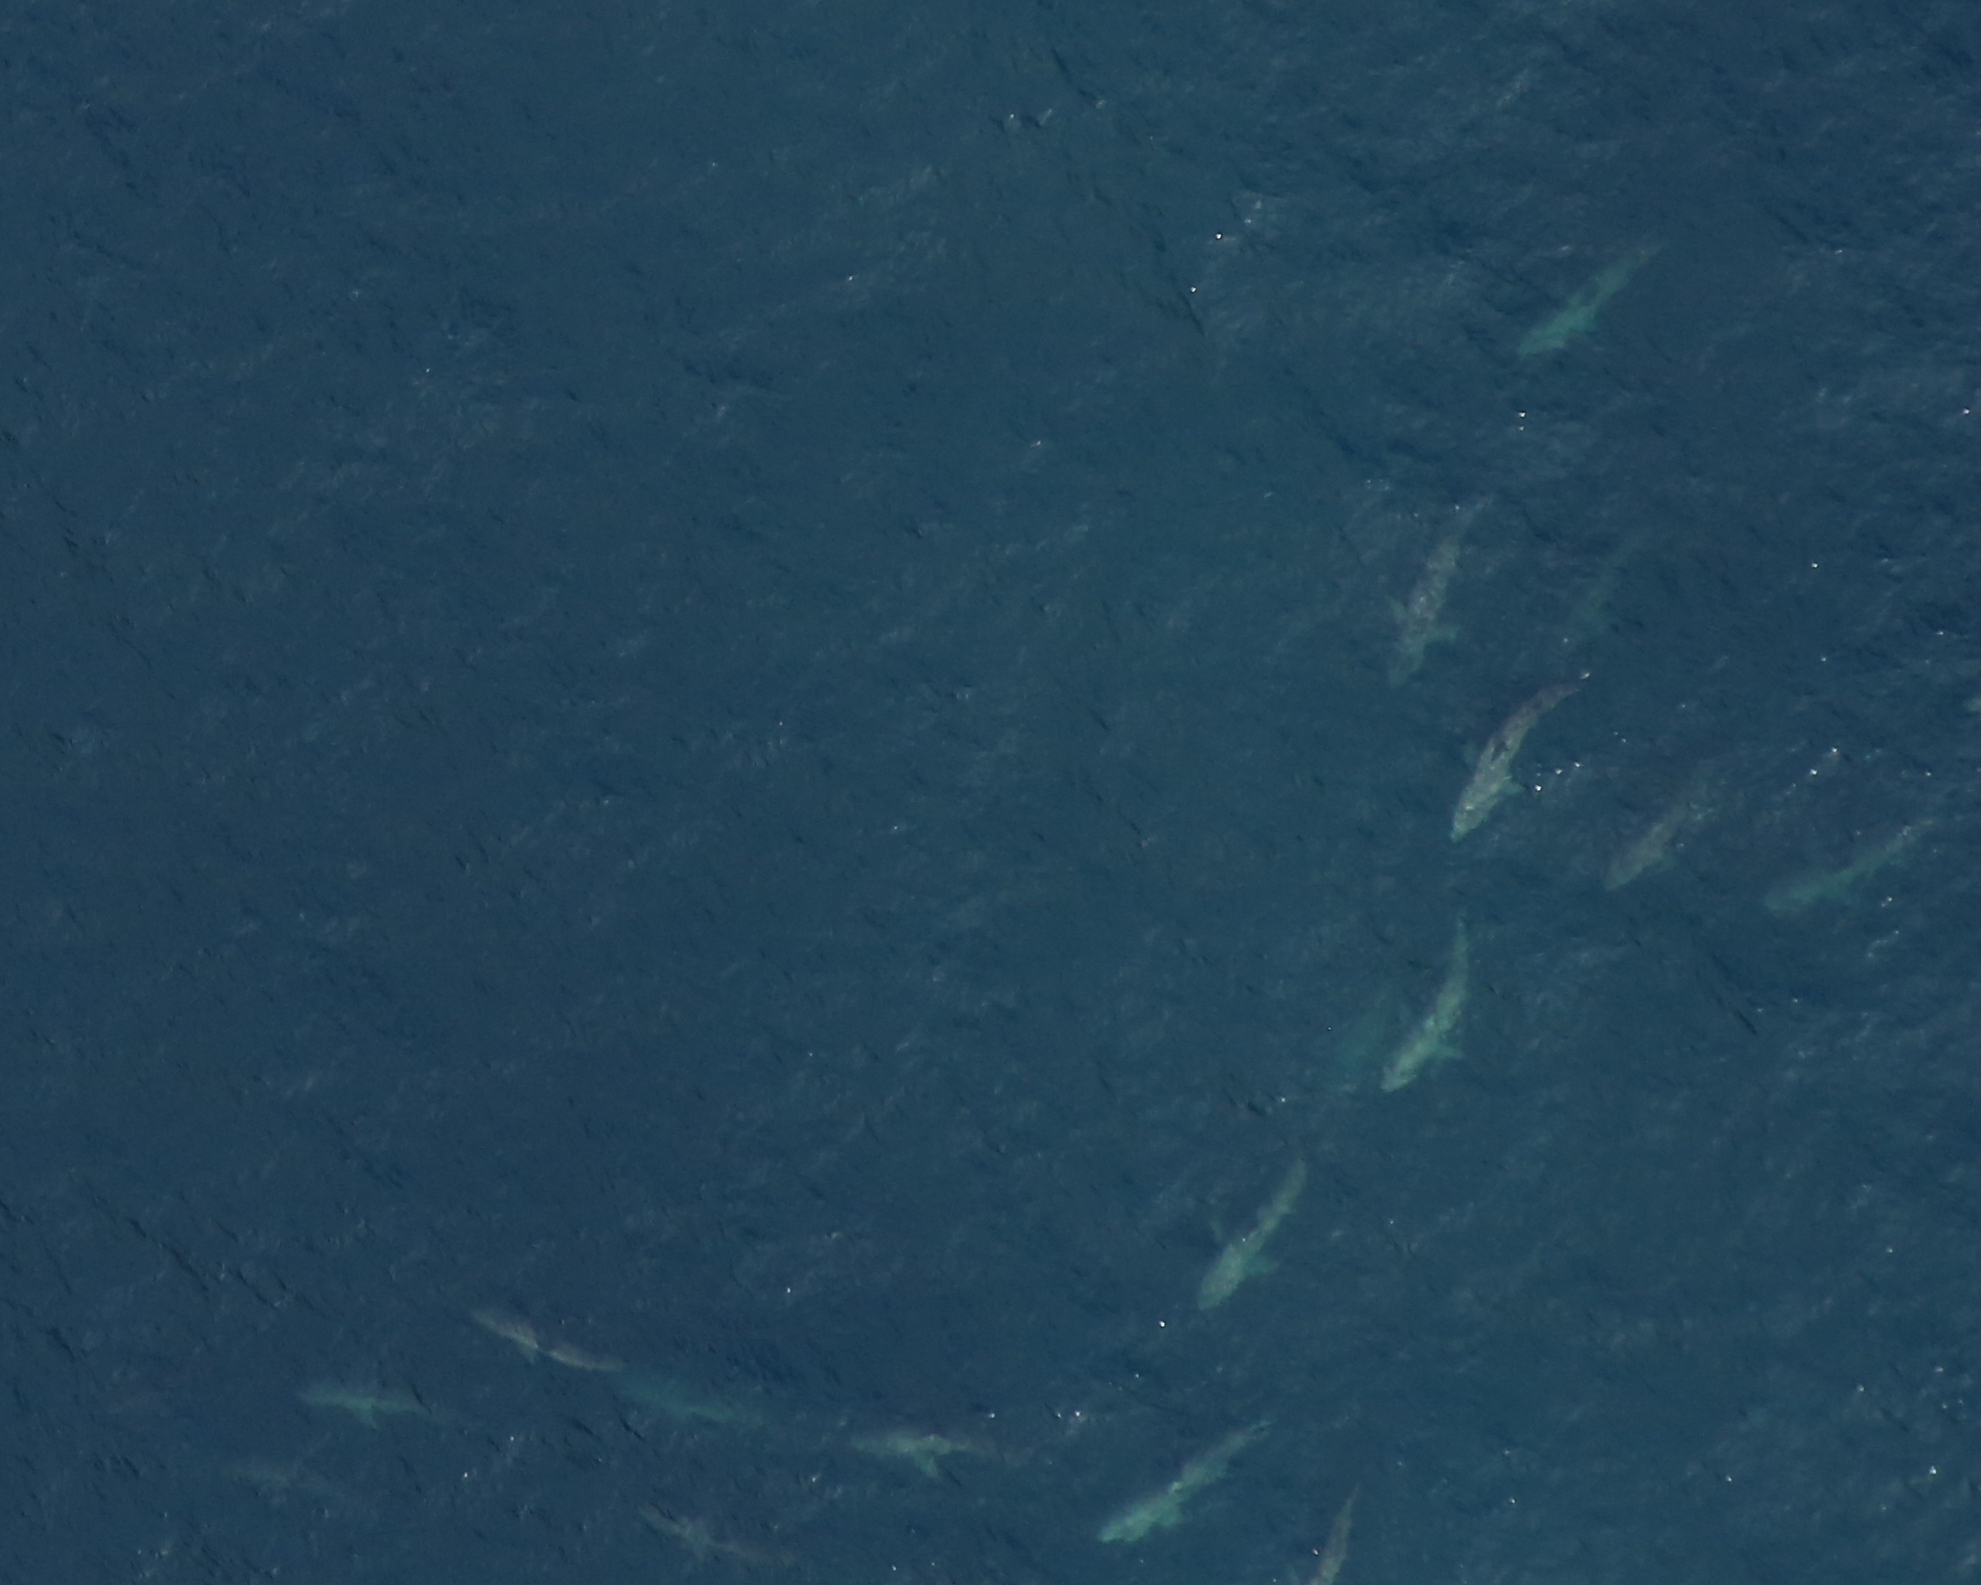 Large groups of basking sharks form swirling patterns in the ocean